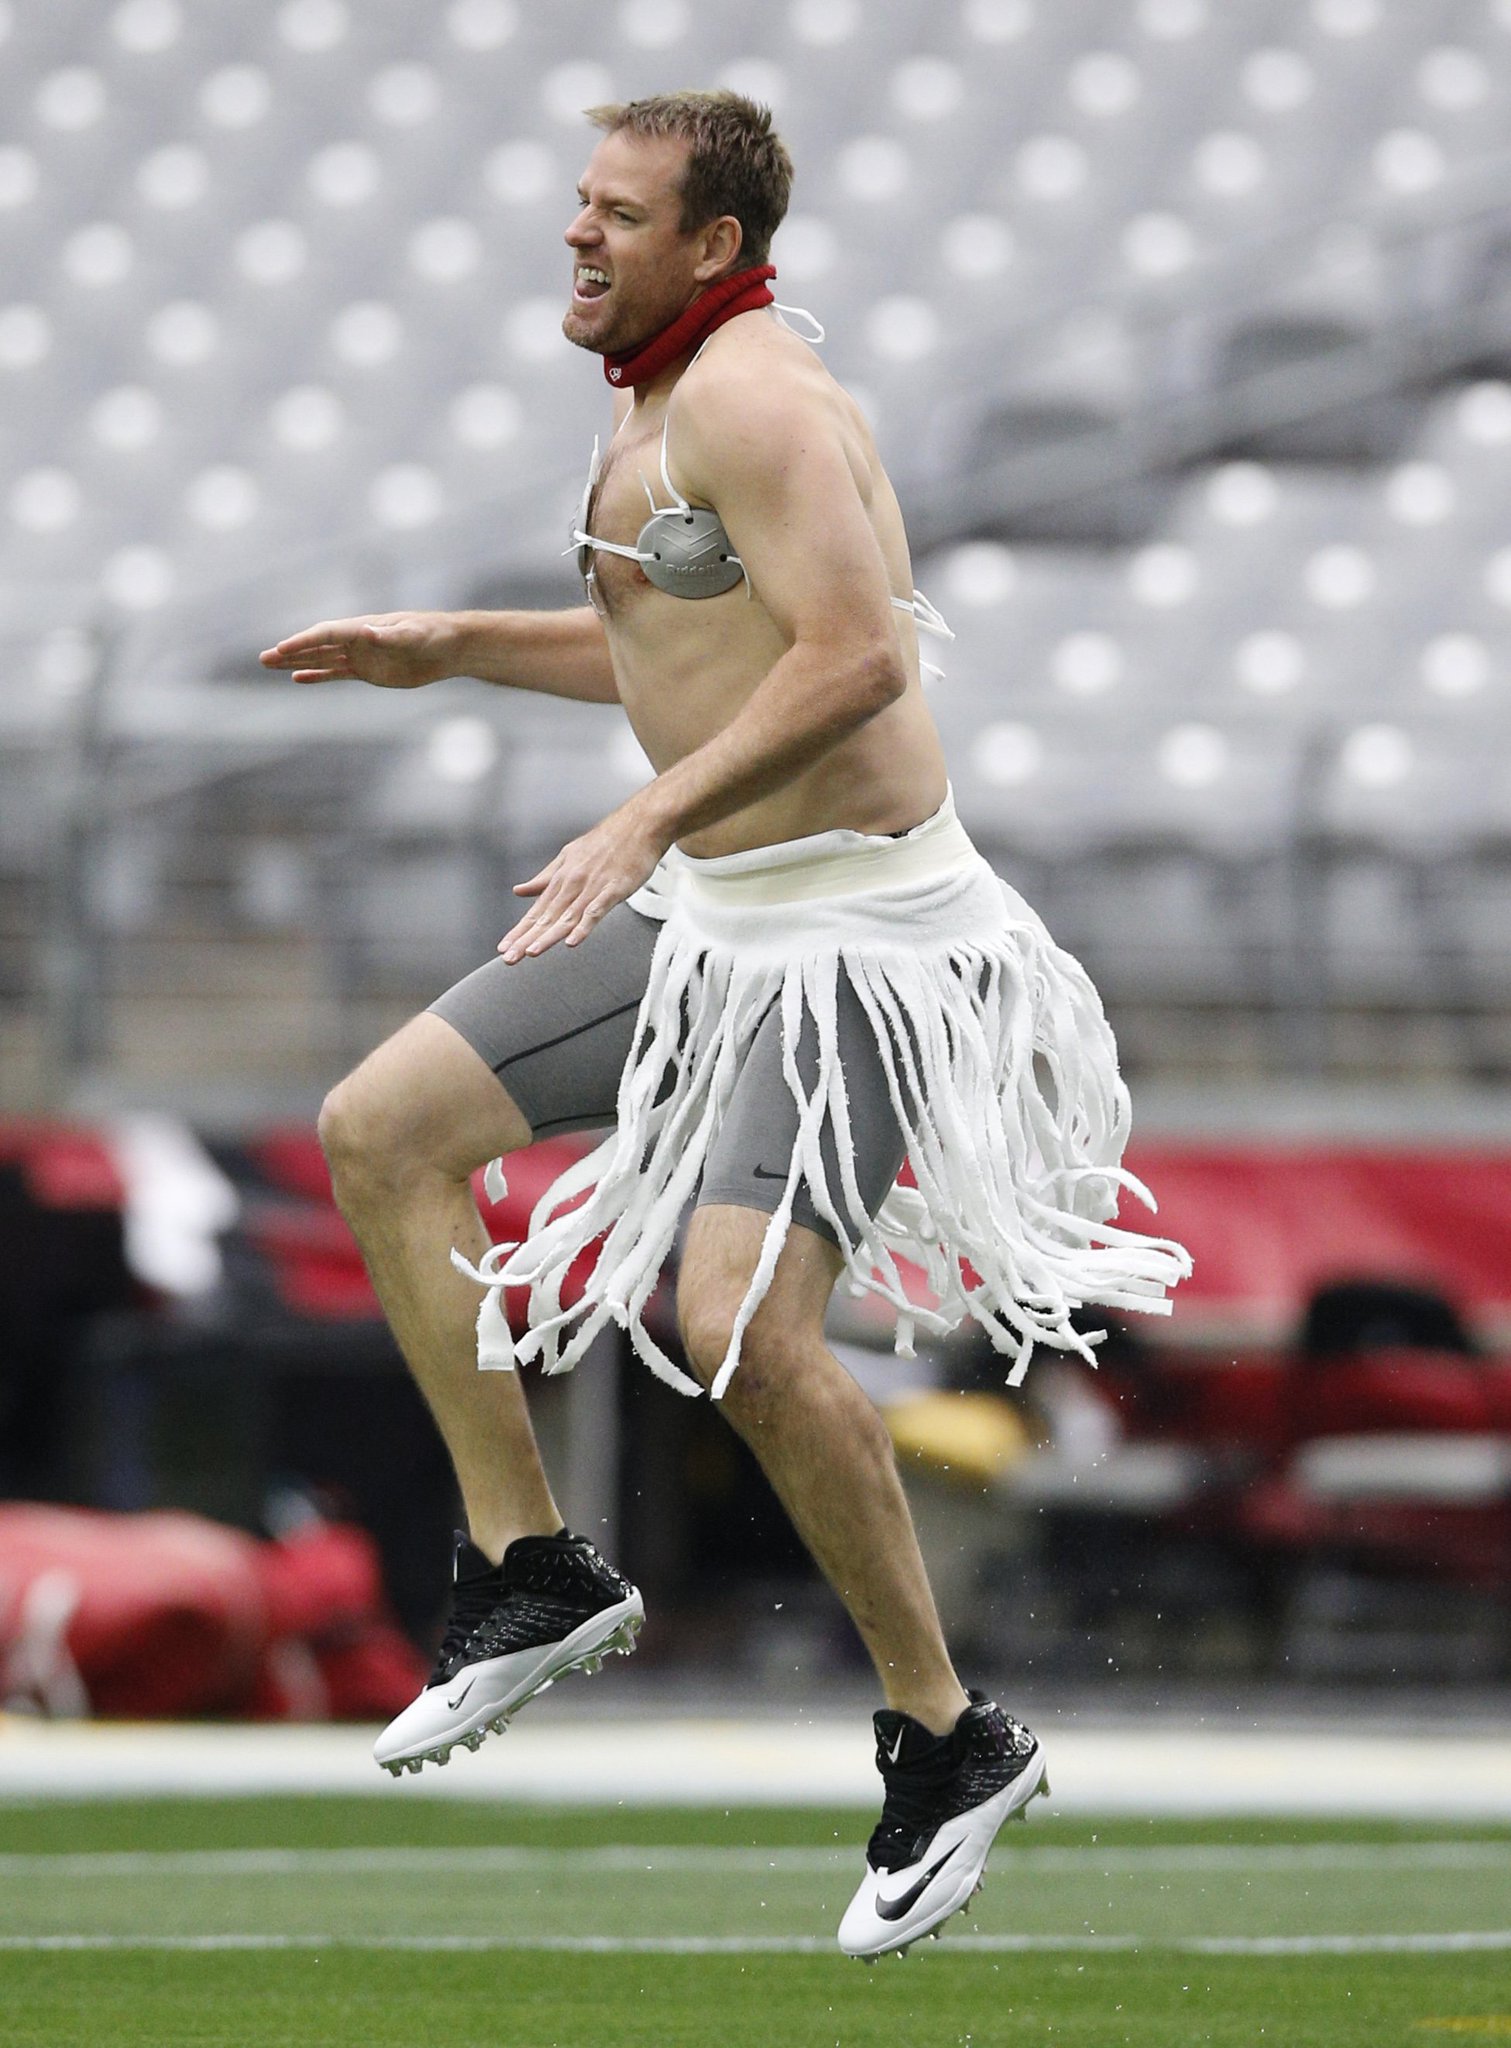   How\s this for a birthday present? Carson Palmer loses his first QB bet of the season.  happy bday 